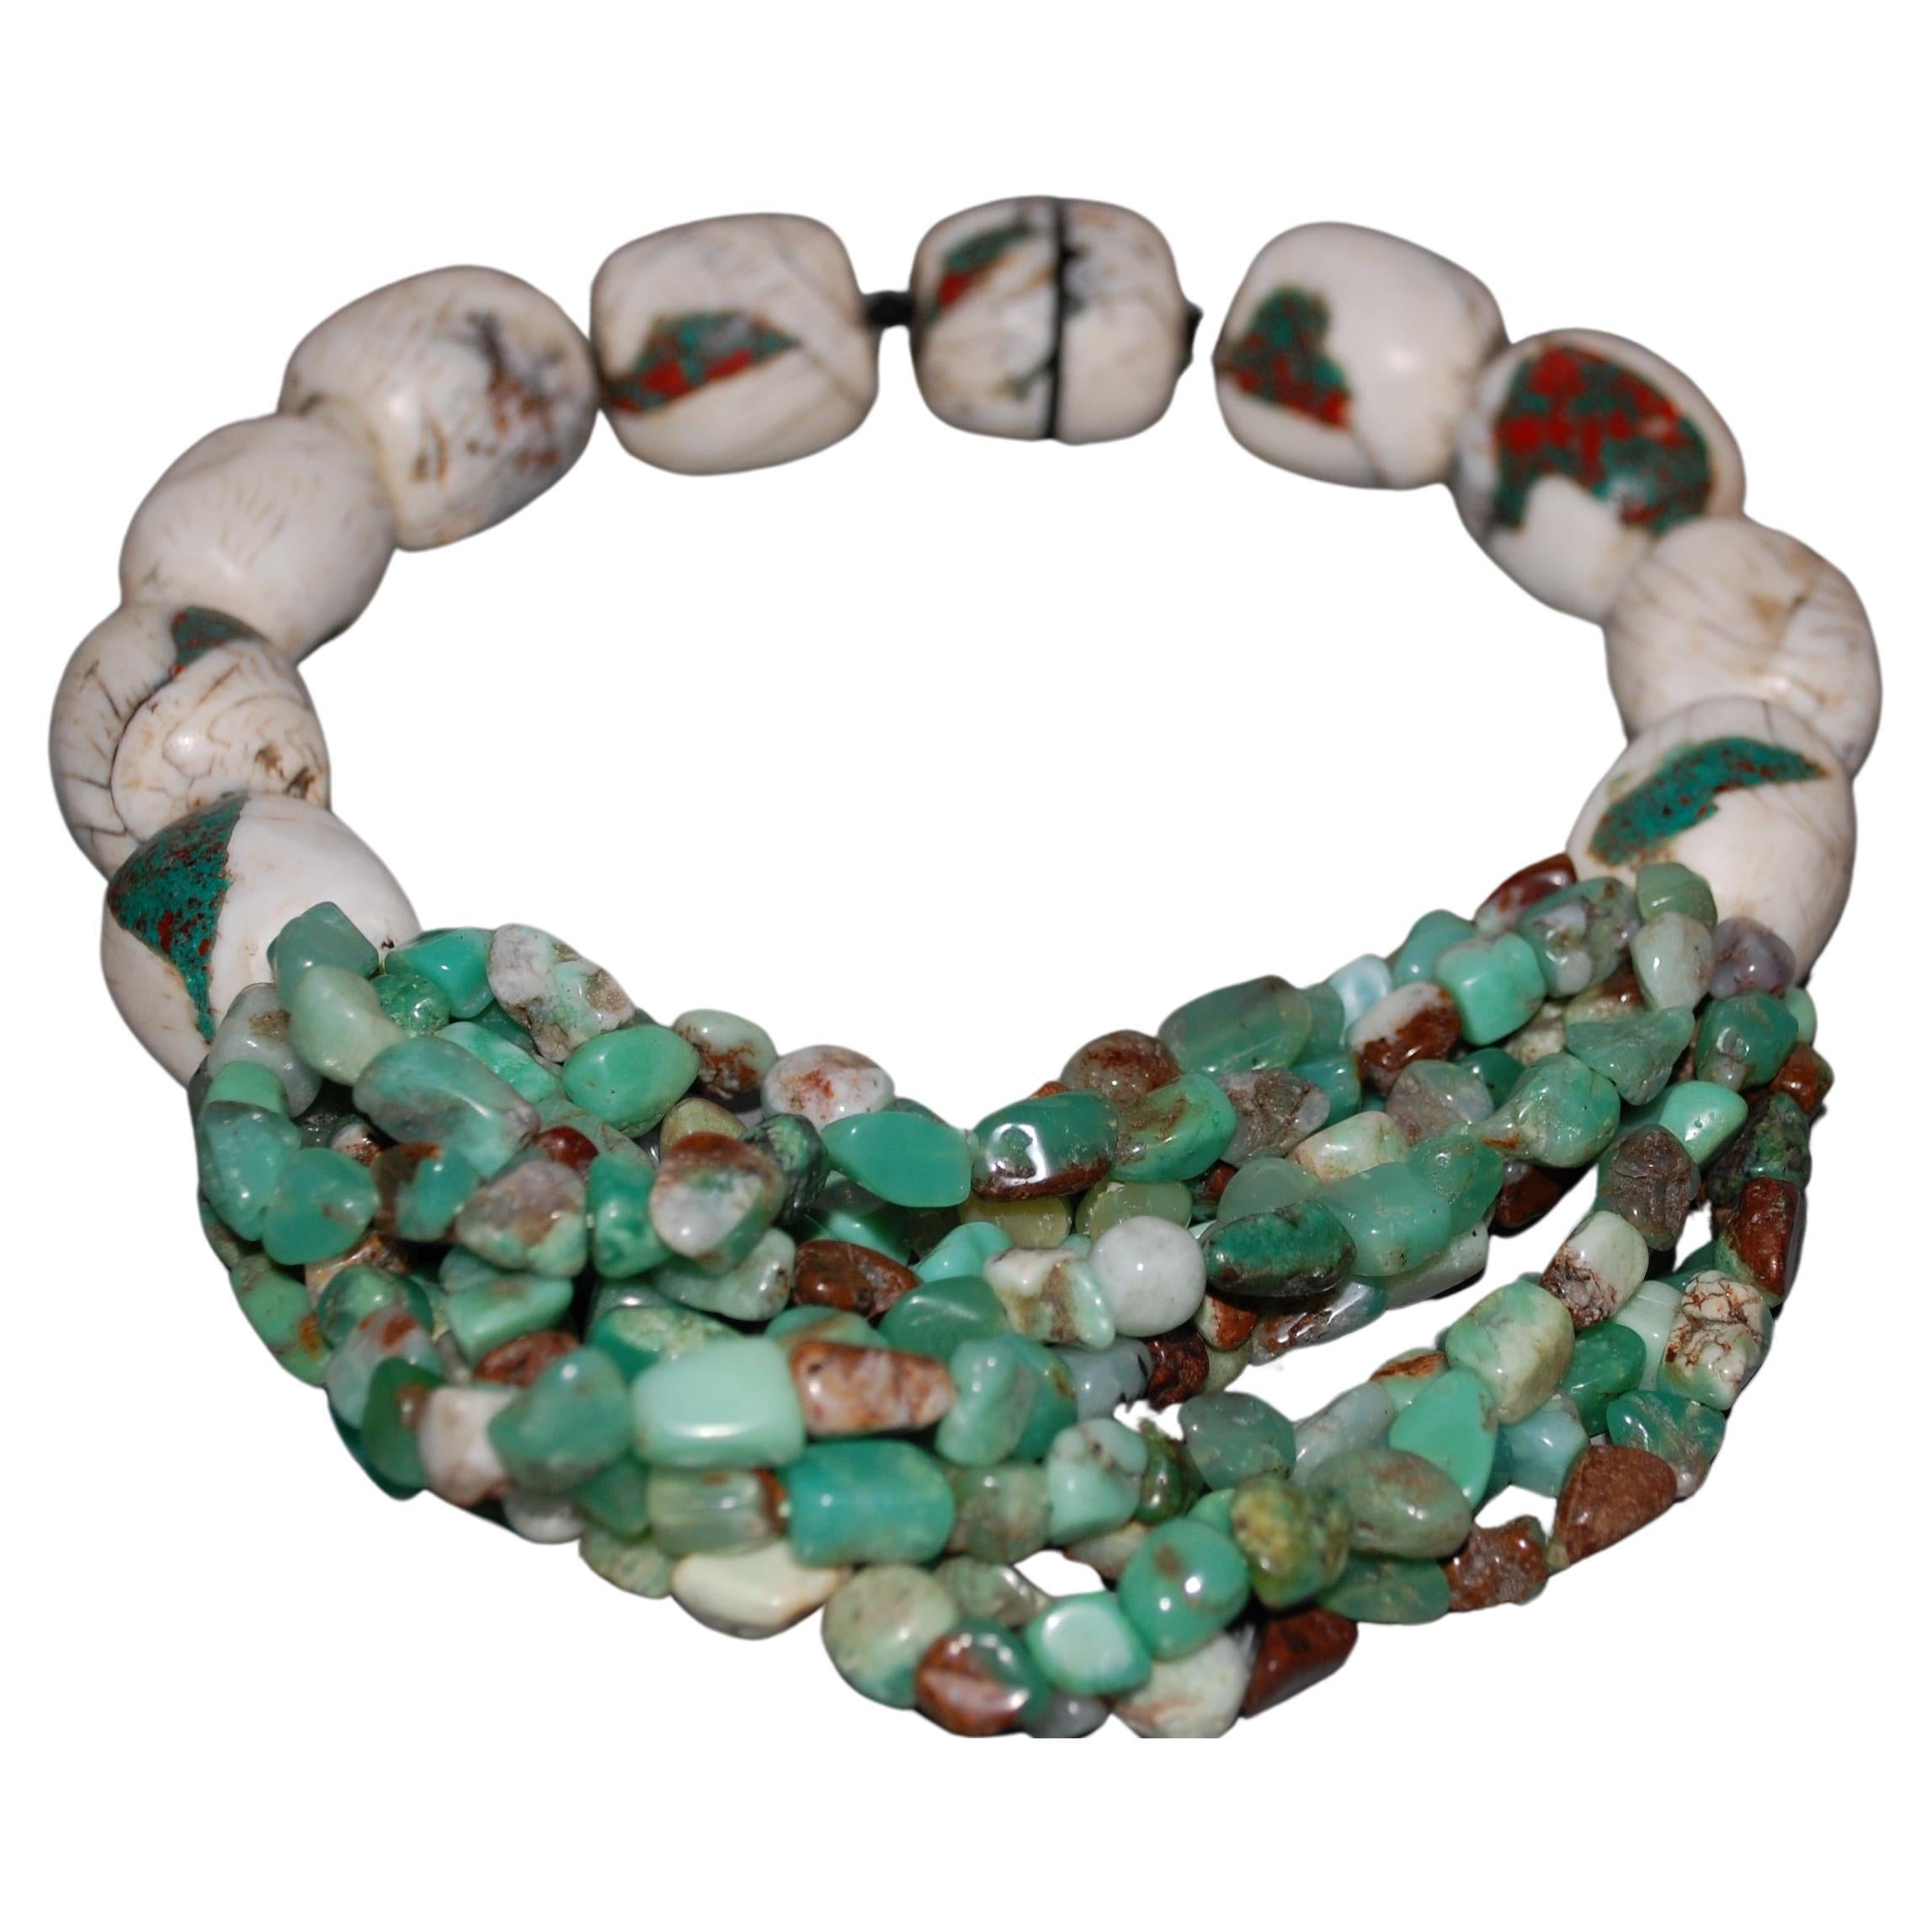 One-of-a-kind stunning statement necklace from the Danish jewelry designer, Monies. Made with large about one inch barrow shape White Buffalo Royston Turquoise and multi strings Chrysoprase stone beads. Signed on the magnetic clasp.  Handcrafted in